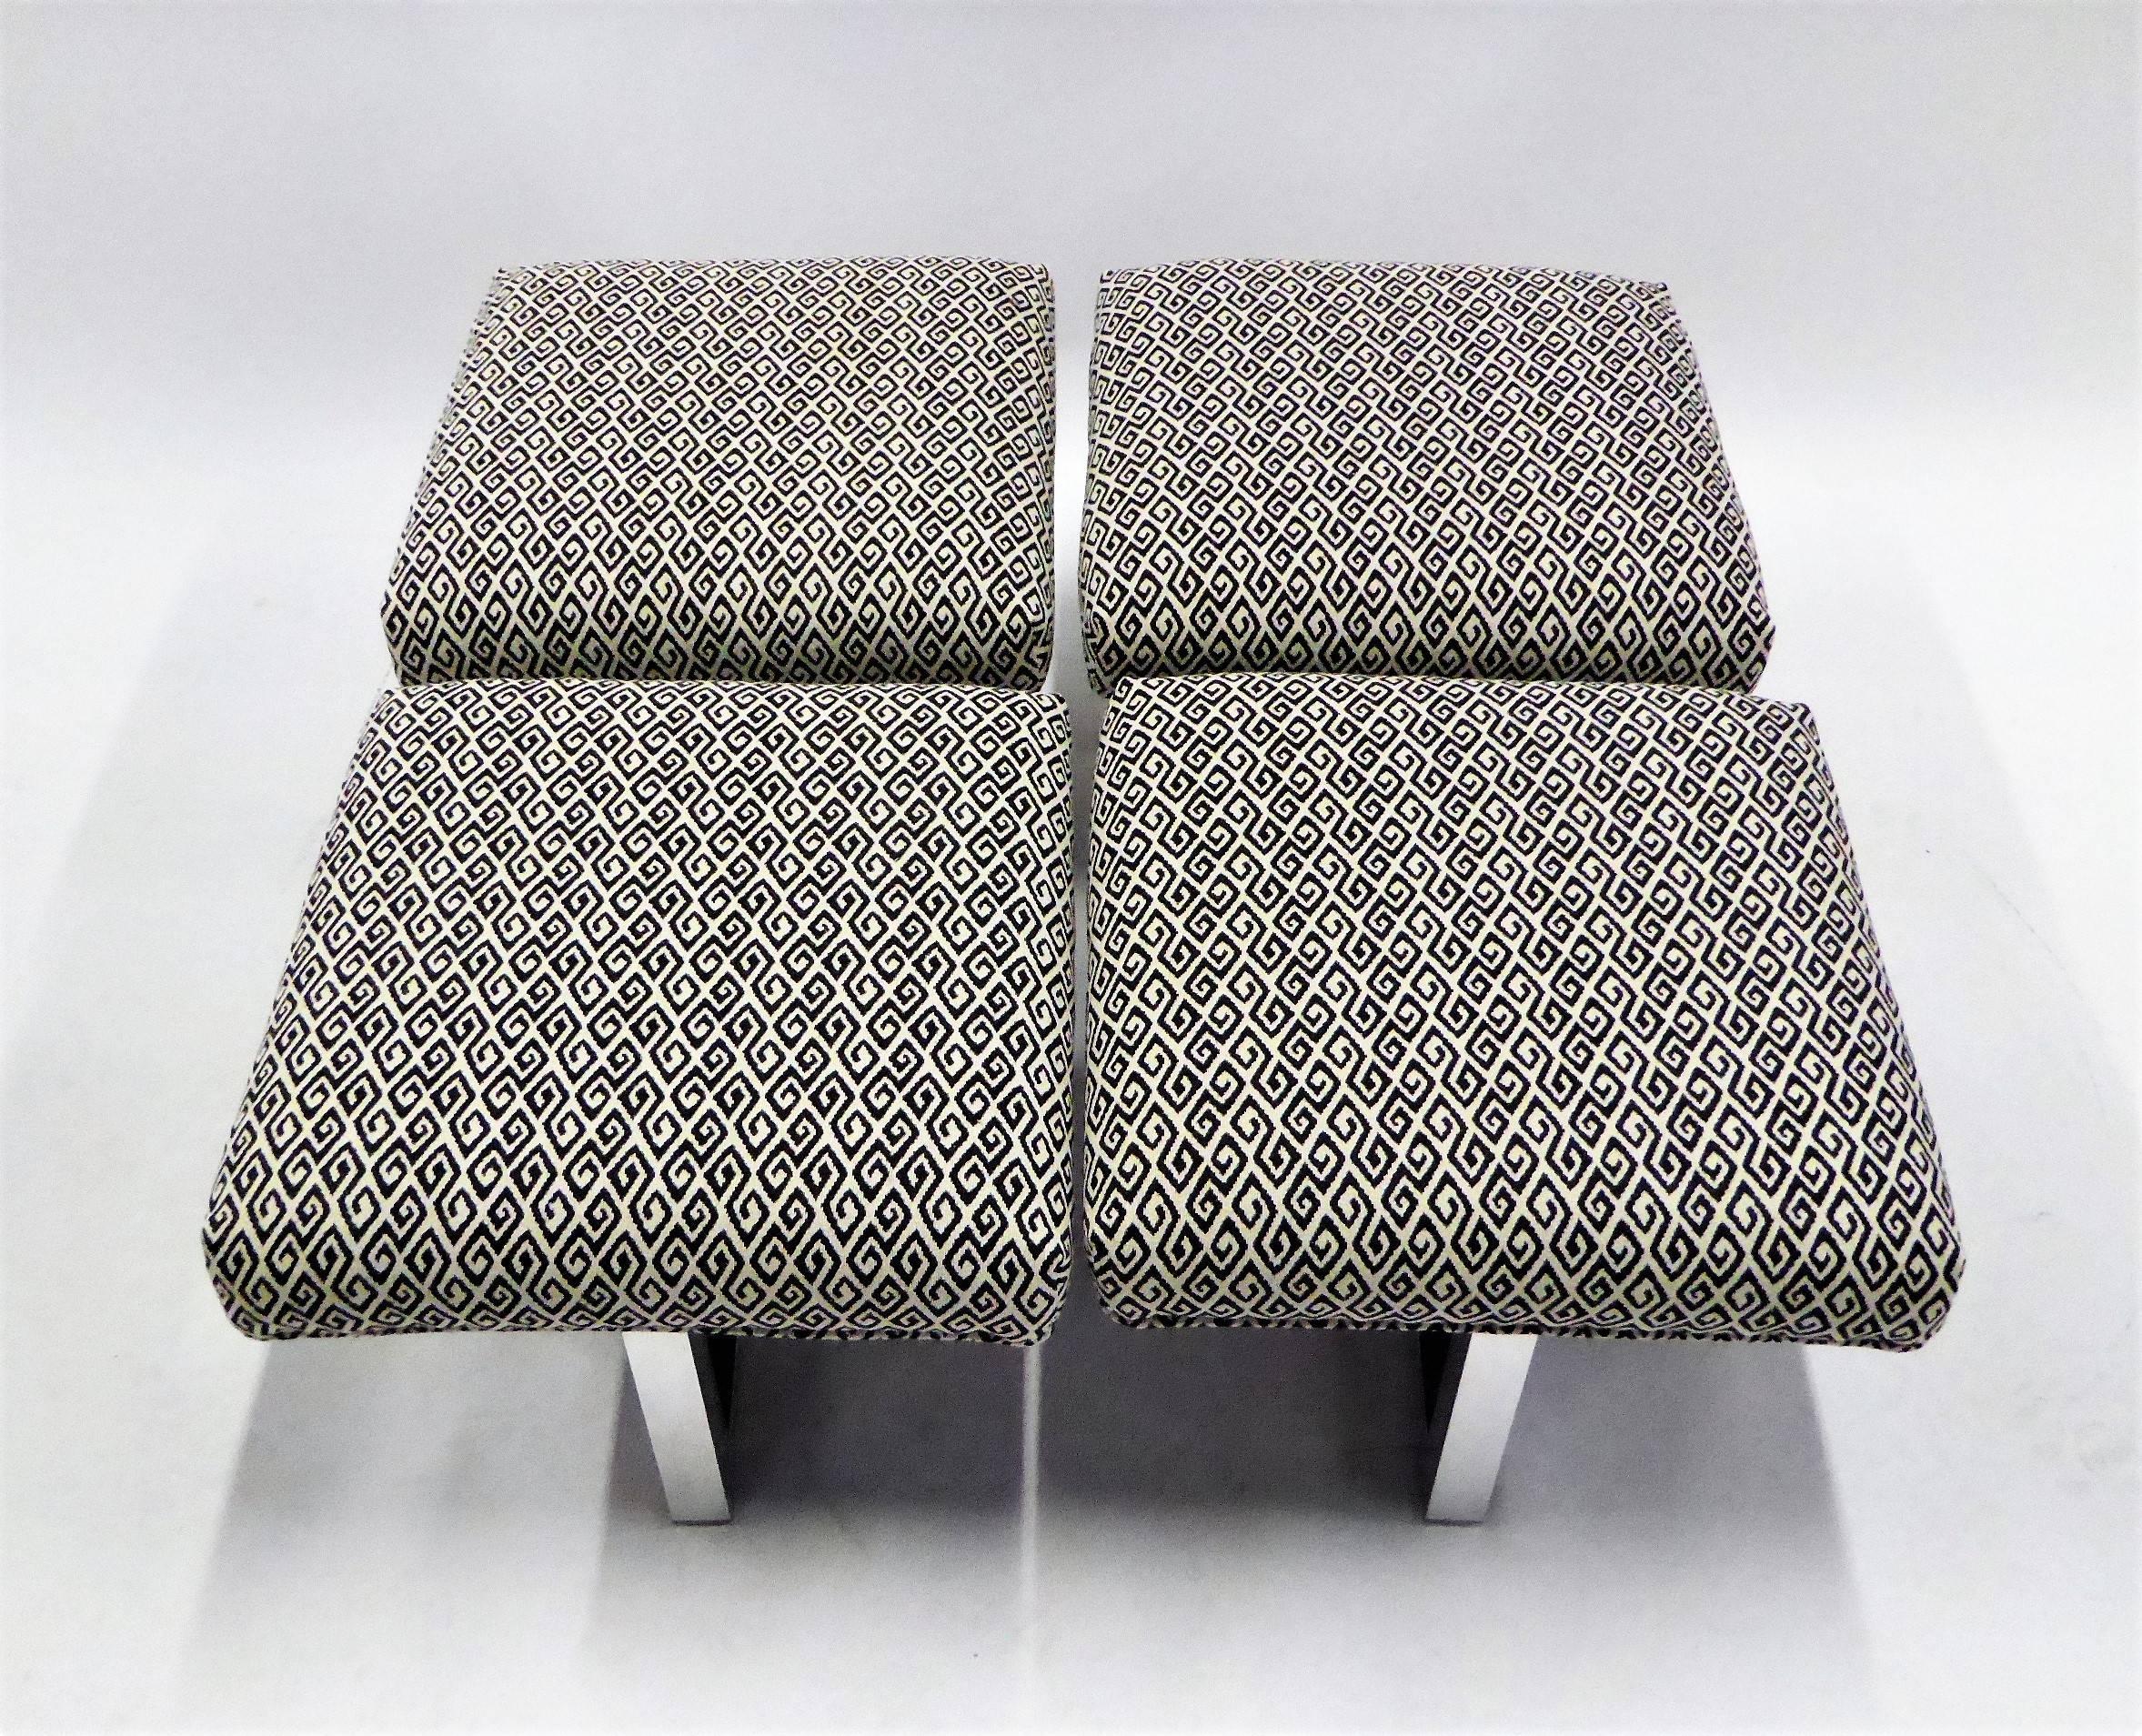 Milo Baughman Style Bench Stools Polished Aluminum Upholstered 2 pairs available 1